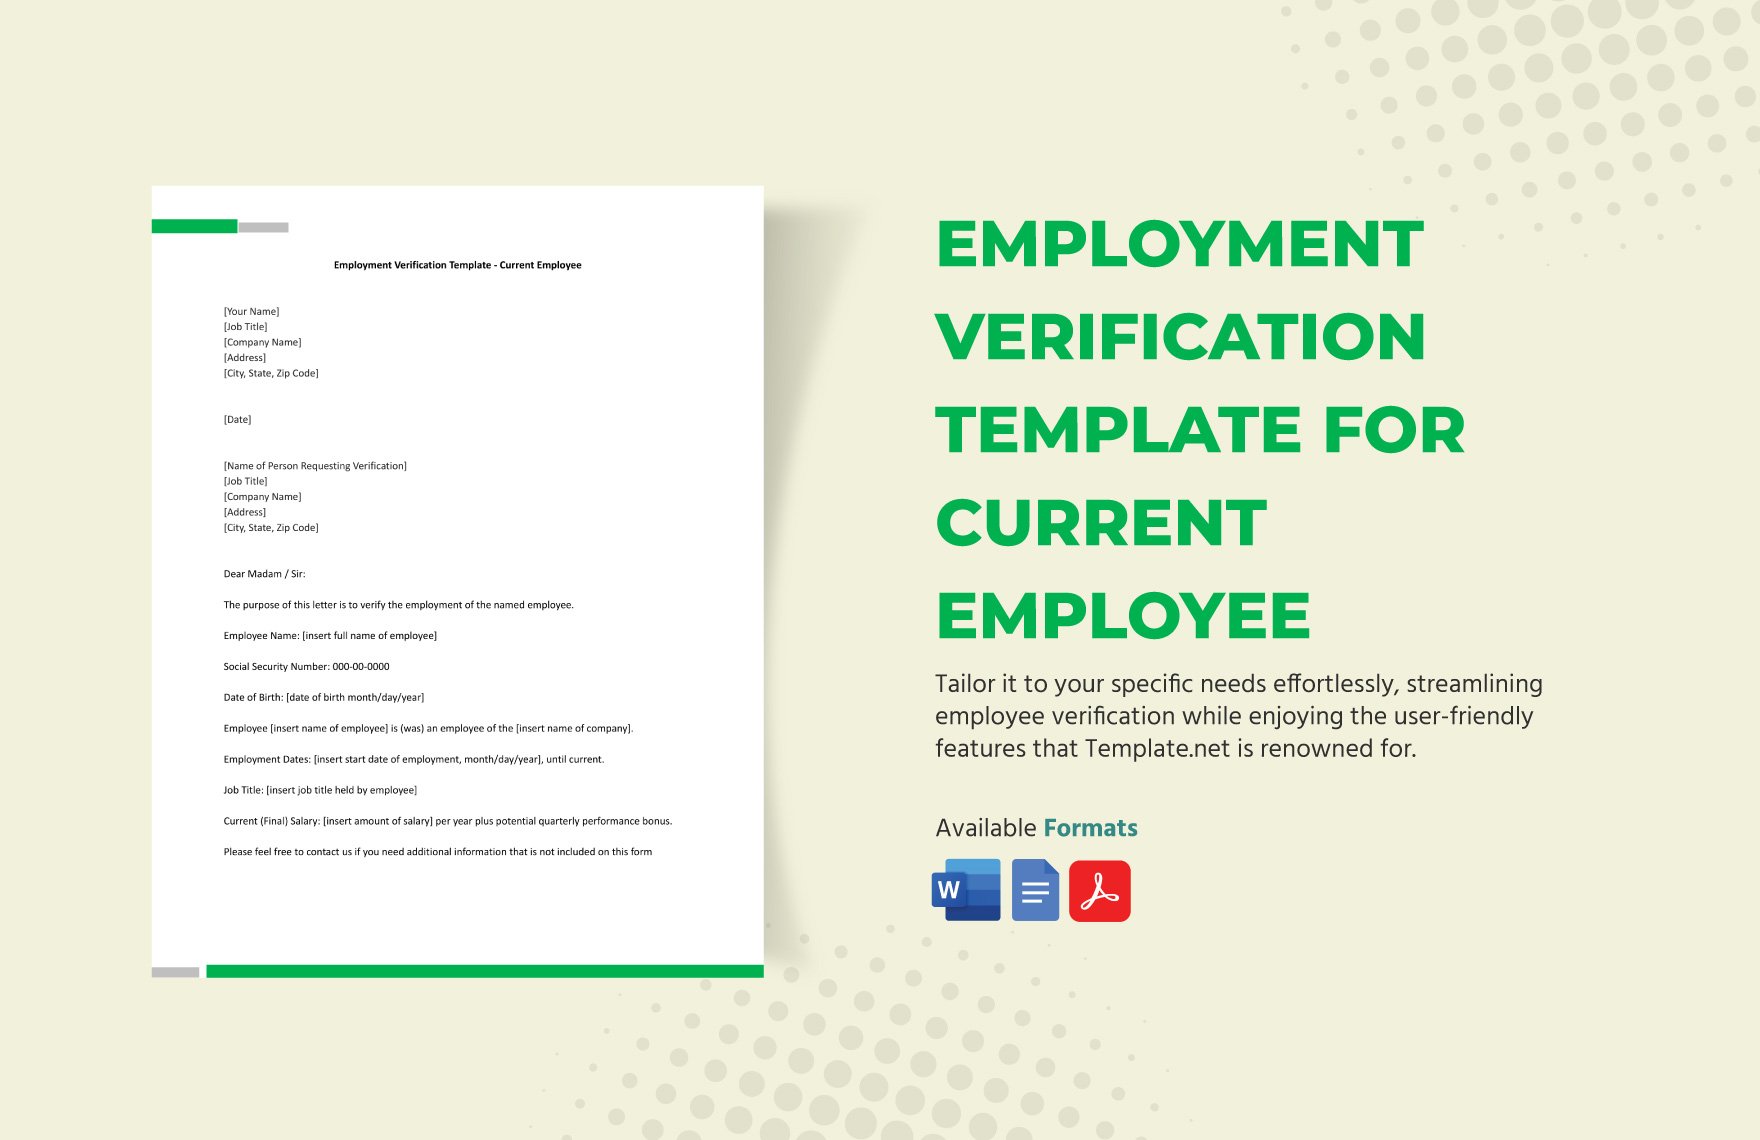 Employment Verification Template for Current Employee in Word, Google Docs, PDF